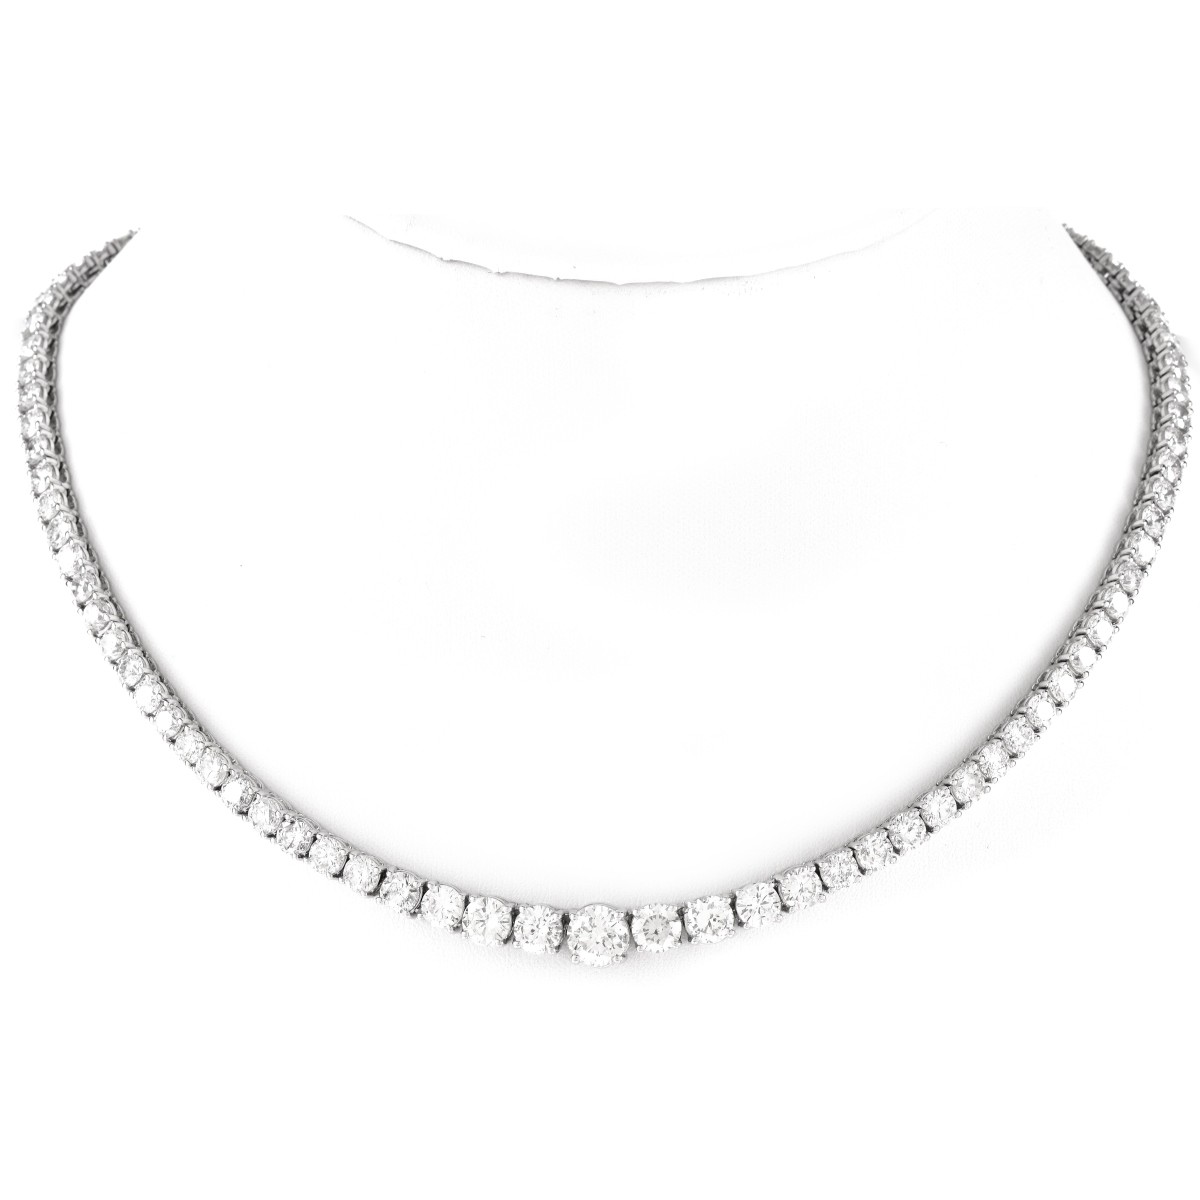 25.0ct Diamond and 18K Gold Riviera Necklace.